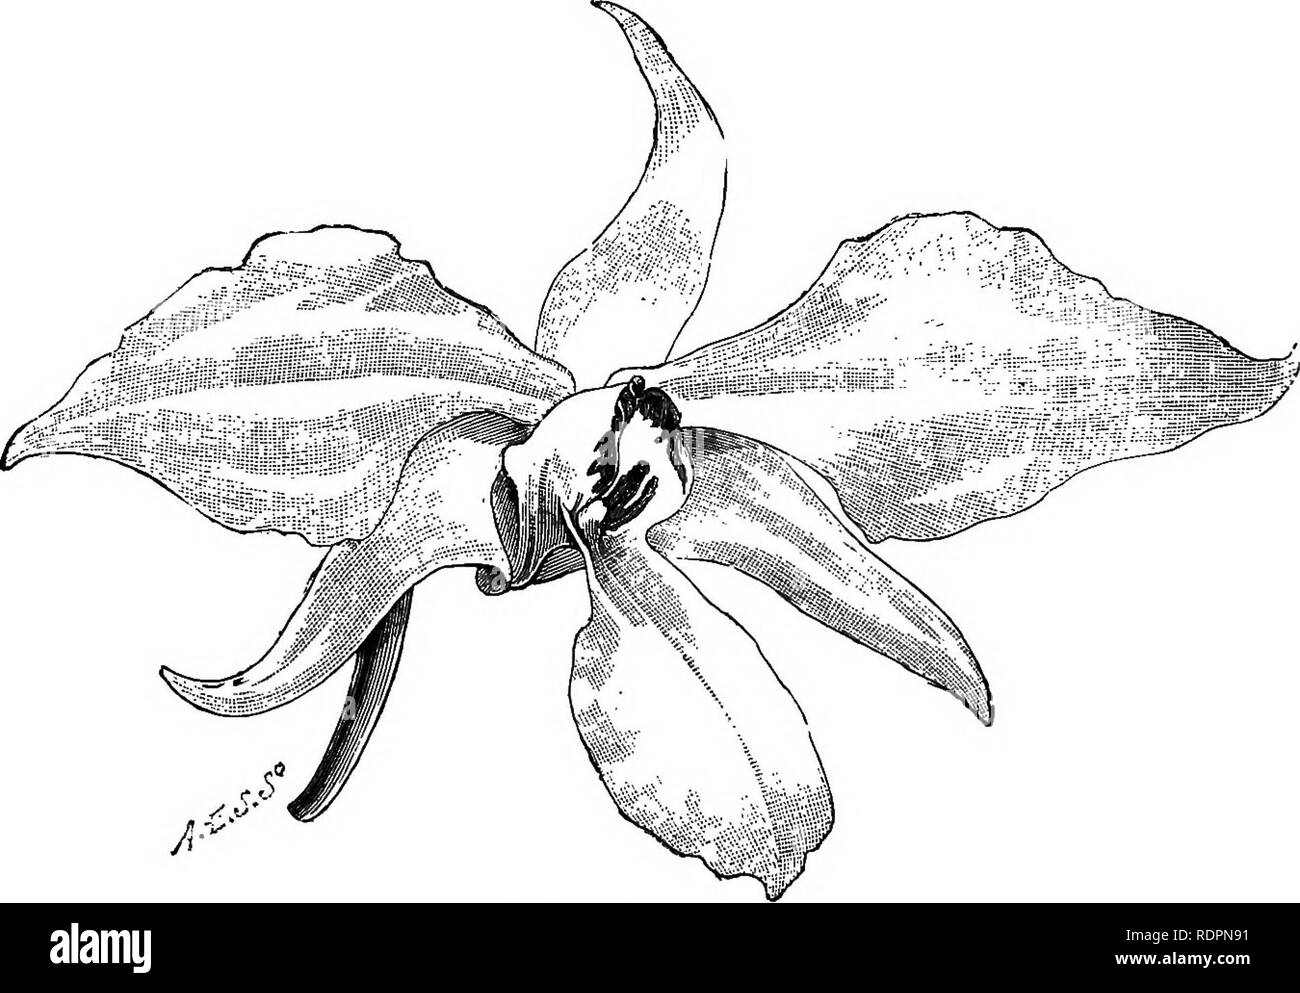 . The orchid-grower's manual, containing descriptions of the best species and varieties of orchidaceous plants in cultivation ... Orchids. â 348 ORCHID-GROWERS MANUAL. stems bear a few lanceolate acuminate leaves on their upper part, and opposite to them at the nodes a four- or five-flowered raceme of extremely beautiful flowers, which are flattened vertically so as to appear half expanded, and consist of lanceolate sepals, oblong lanceolate broader petals of a bright pinkish-rose, and a spathulate-trapeziform lip, which is white in the lower part, with small purple spots in the throat, a larg Stock Photo